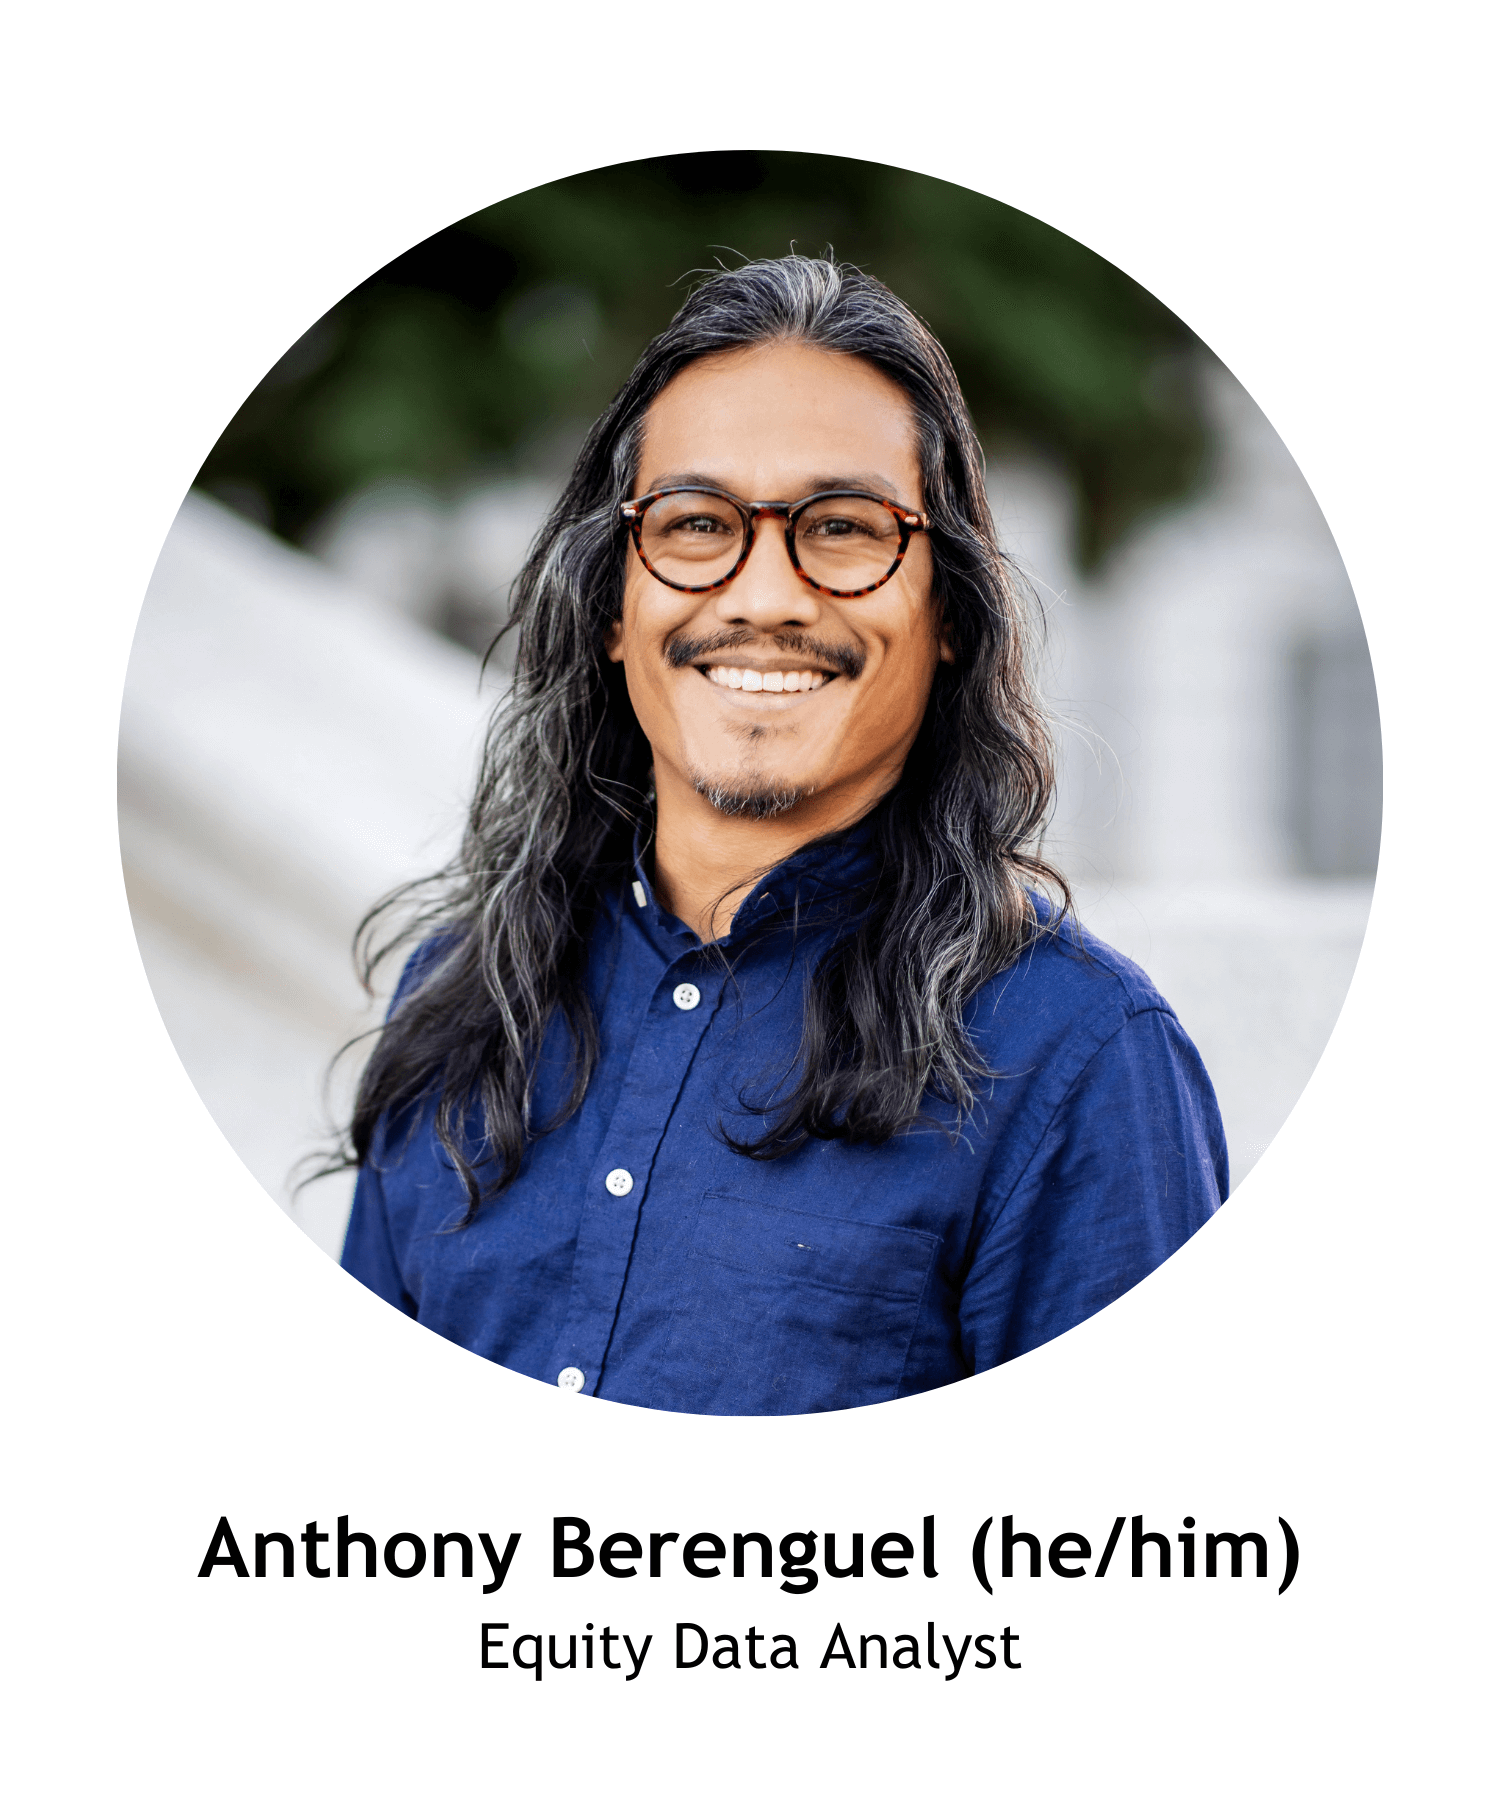 Anthony Berenguel (he/him), Equity Data Analyst